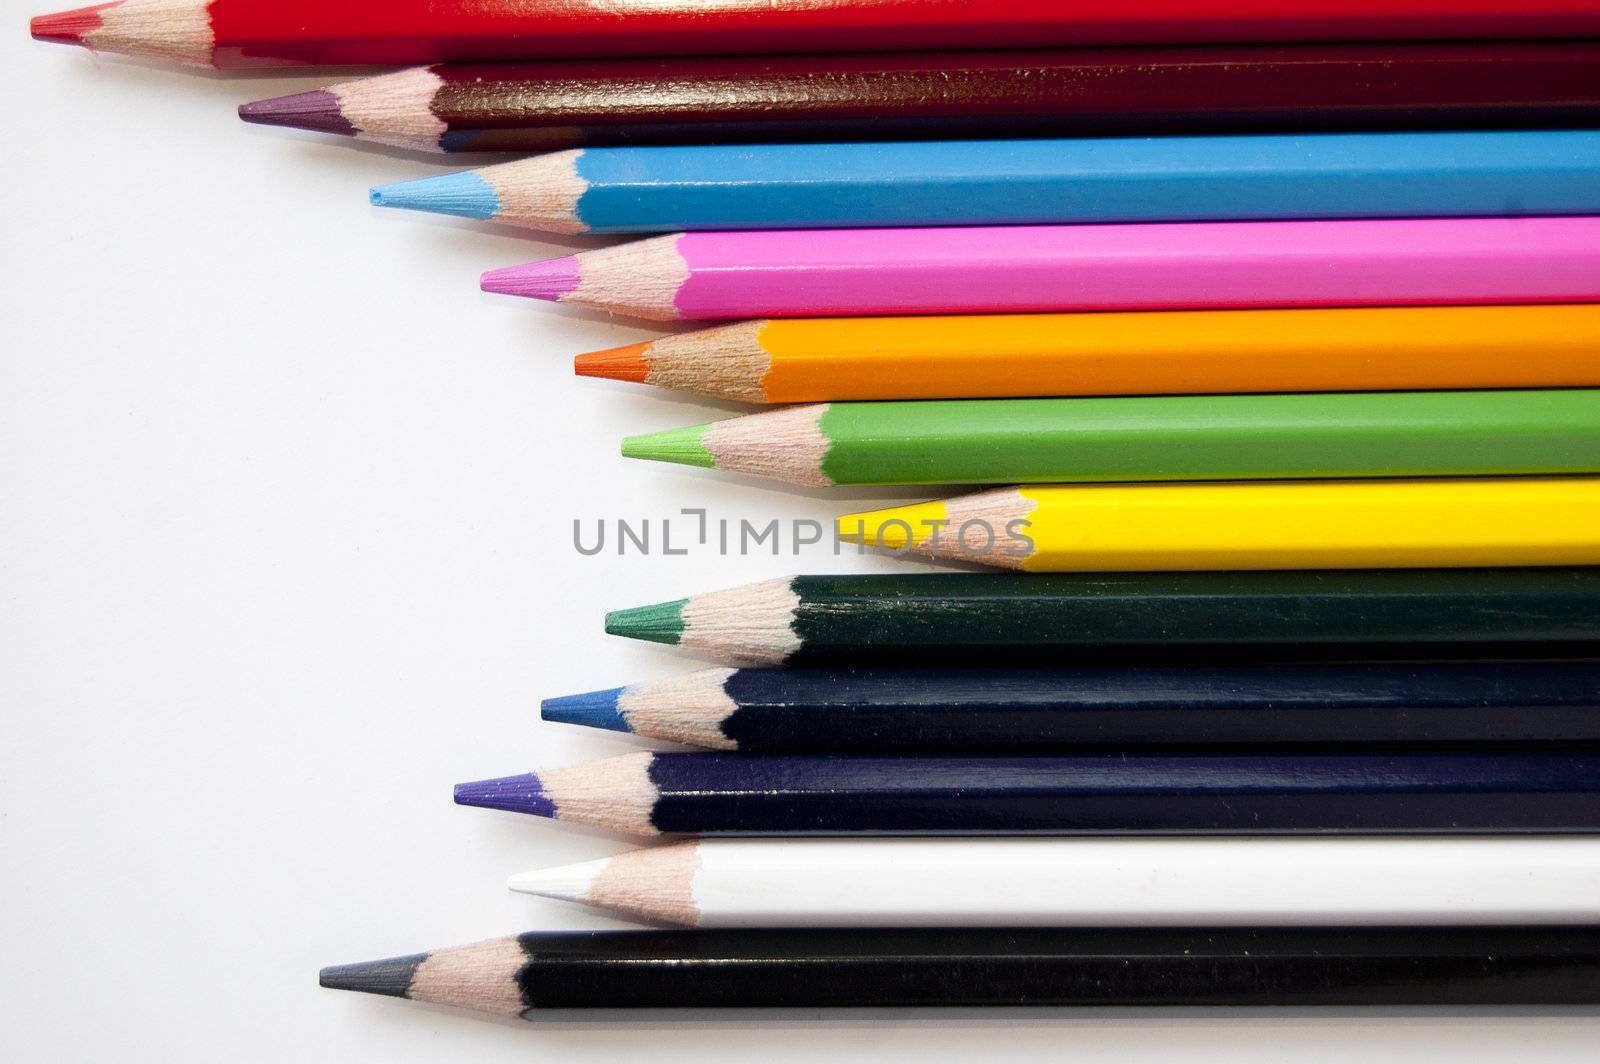 Close up of many colored pencils isolated